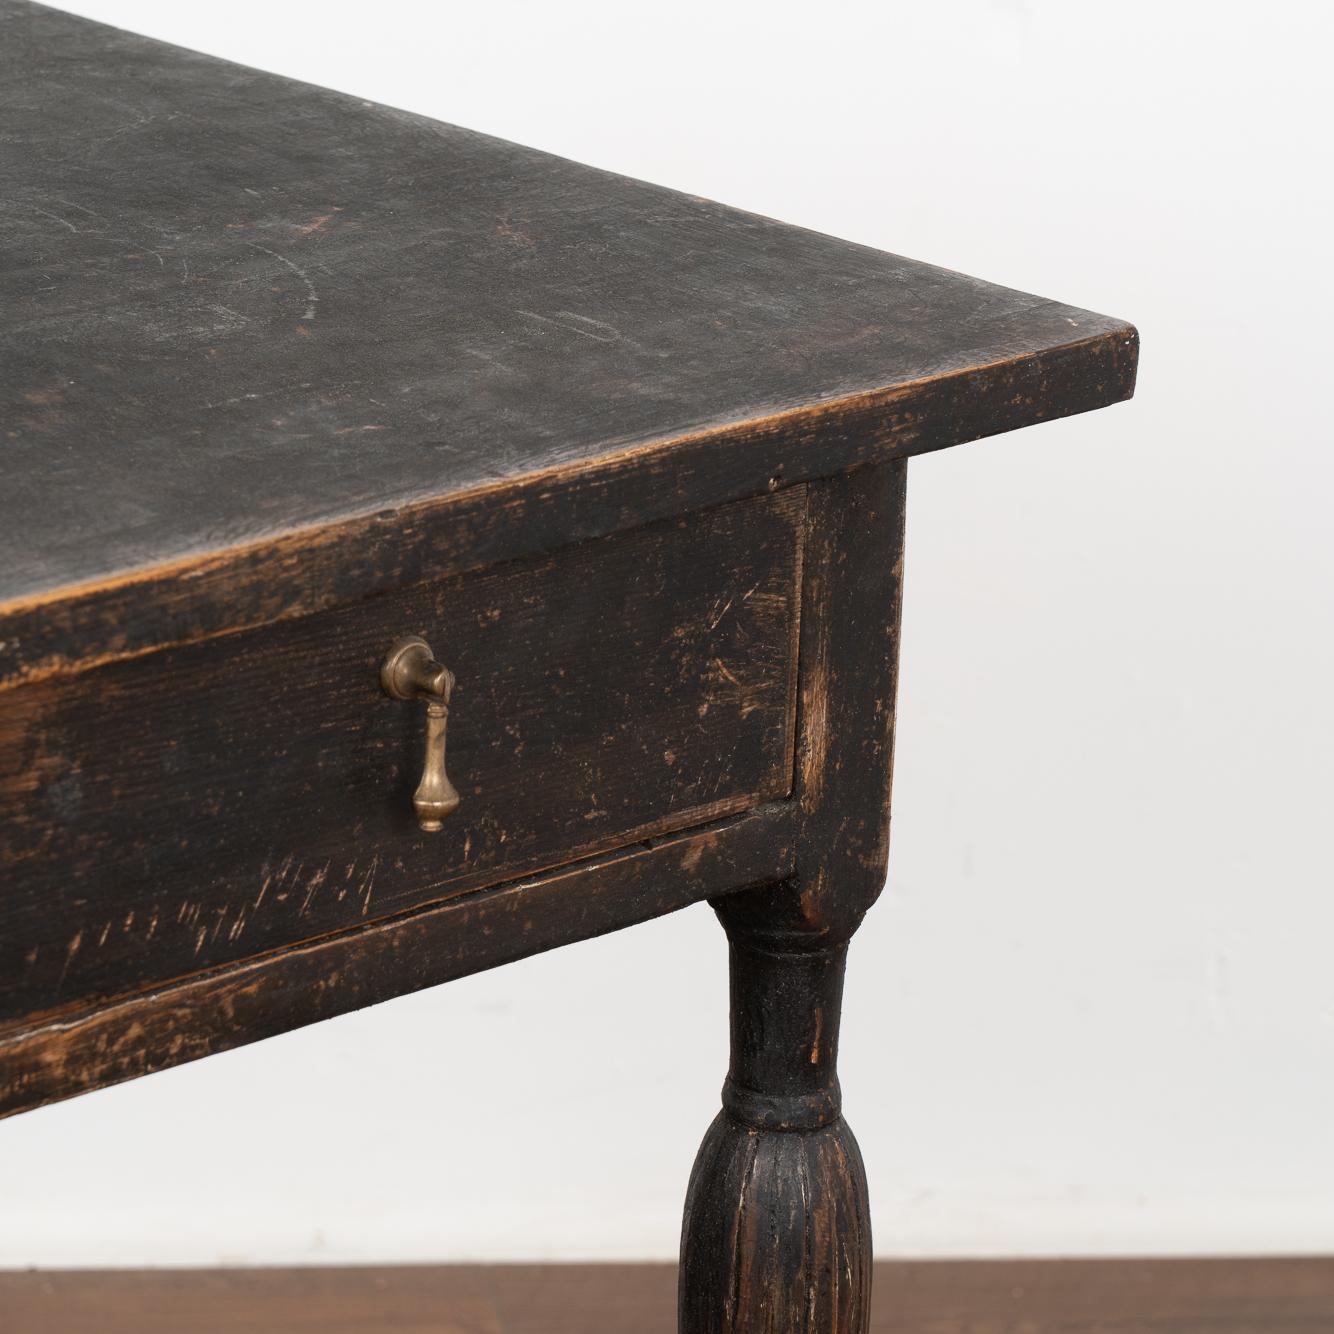 Wood Black Side Table With Single Drawer, Sweden circa 1820